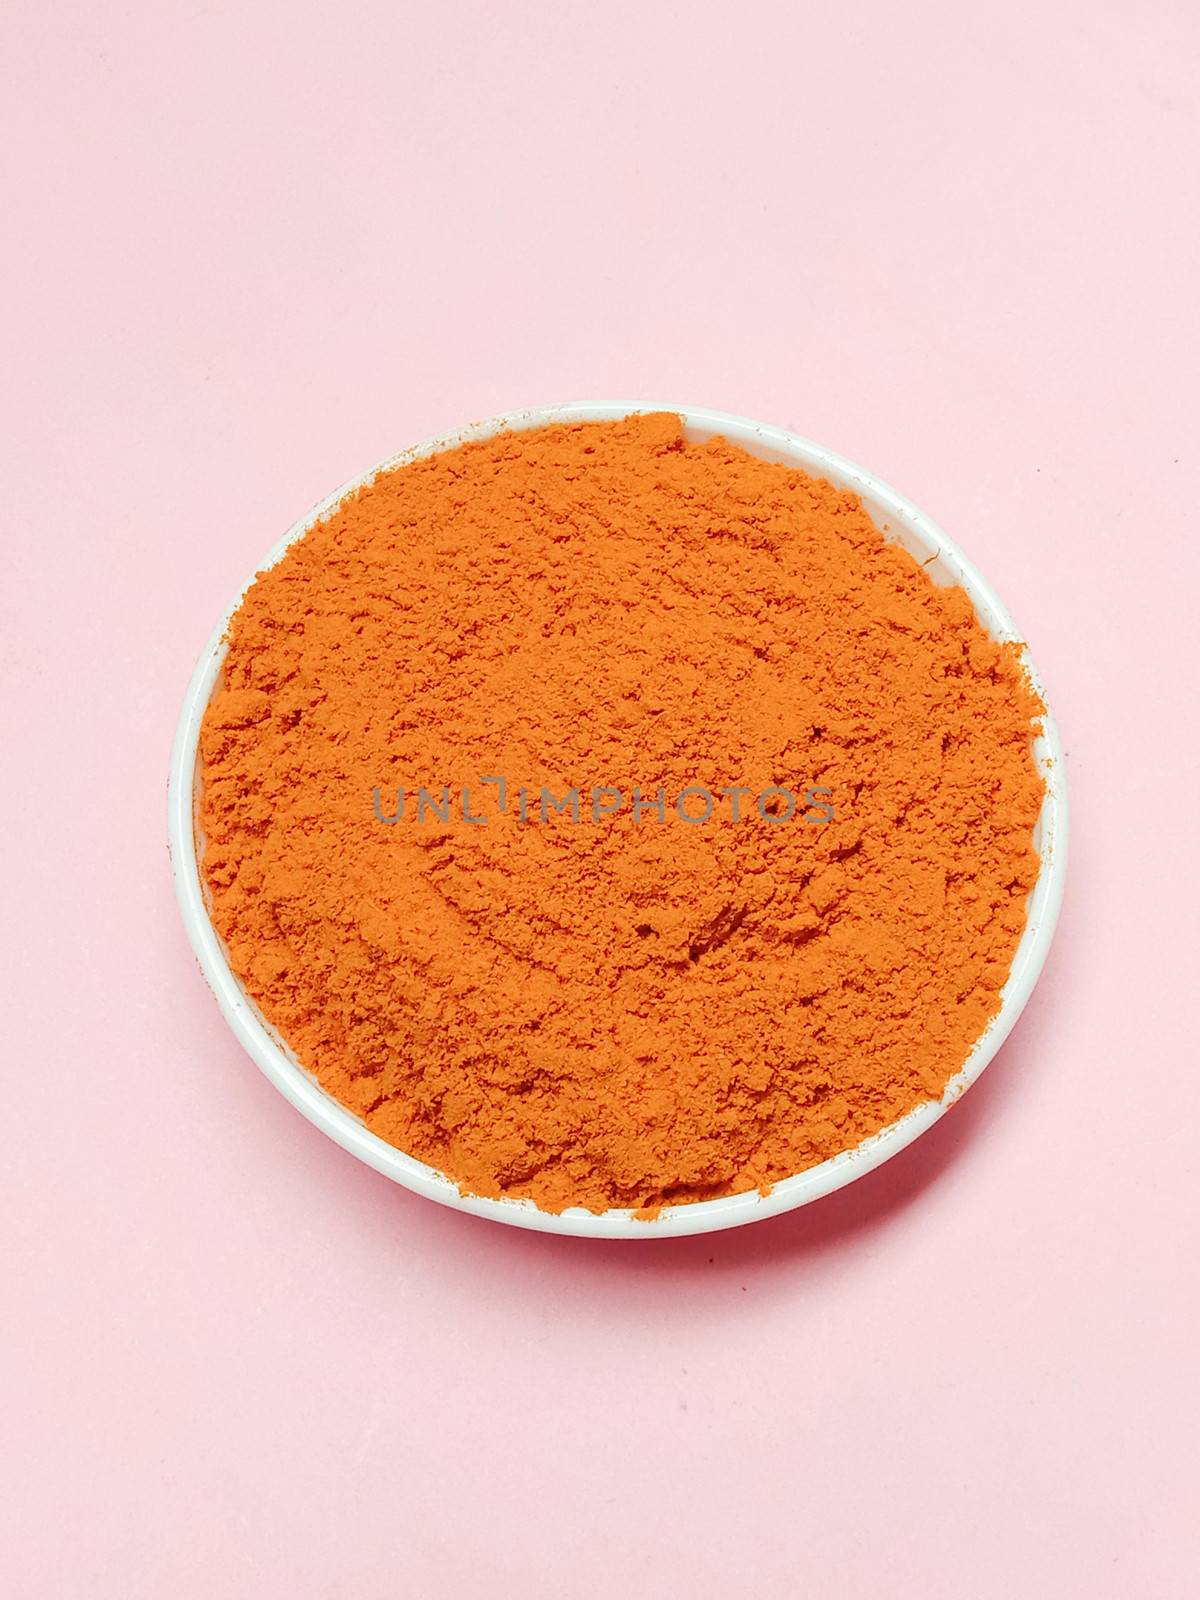 spicy and hot Turmeric powder on bowl